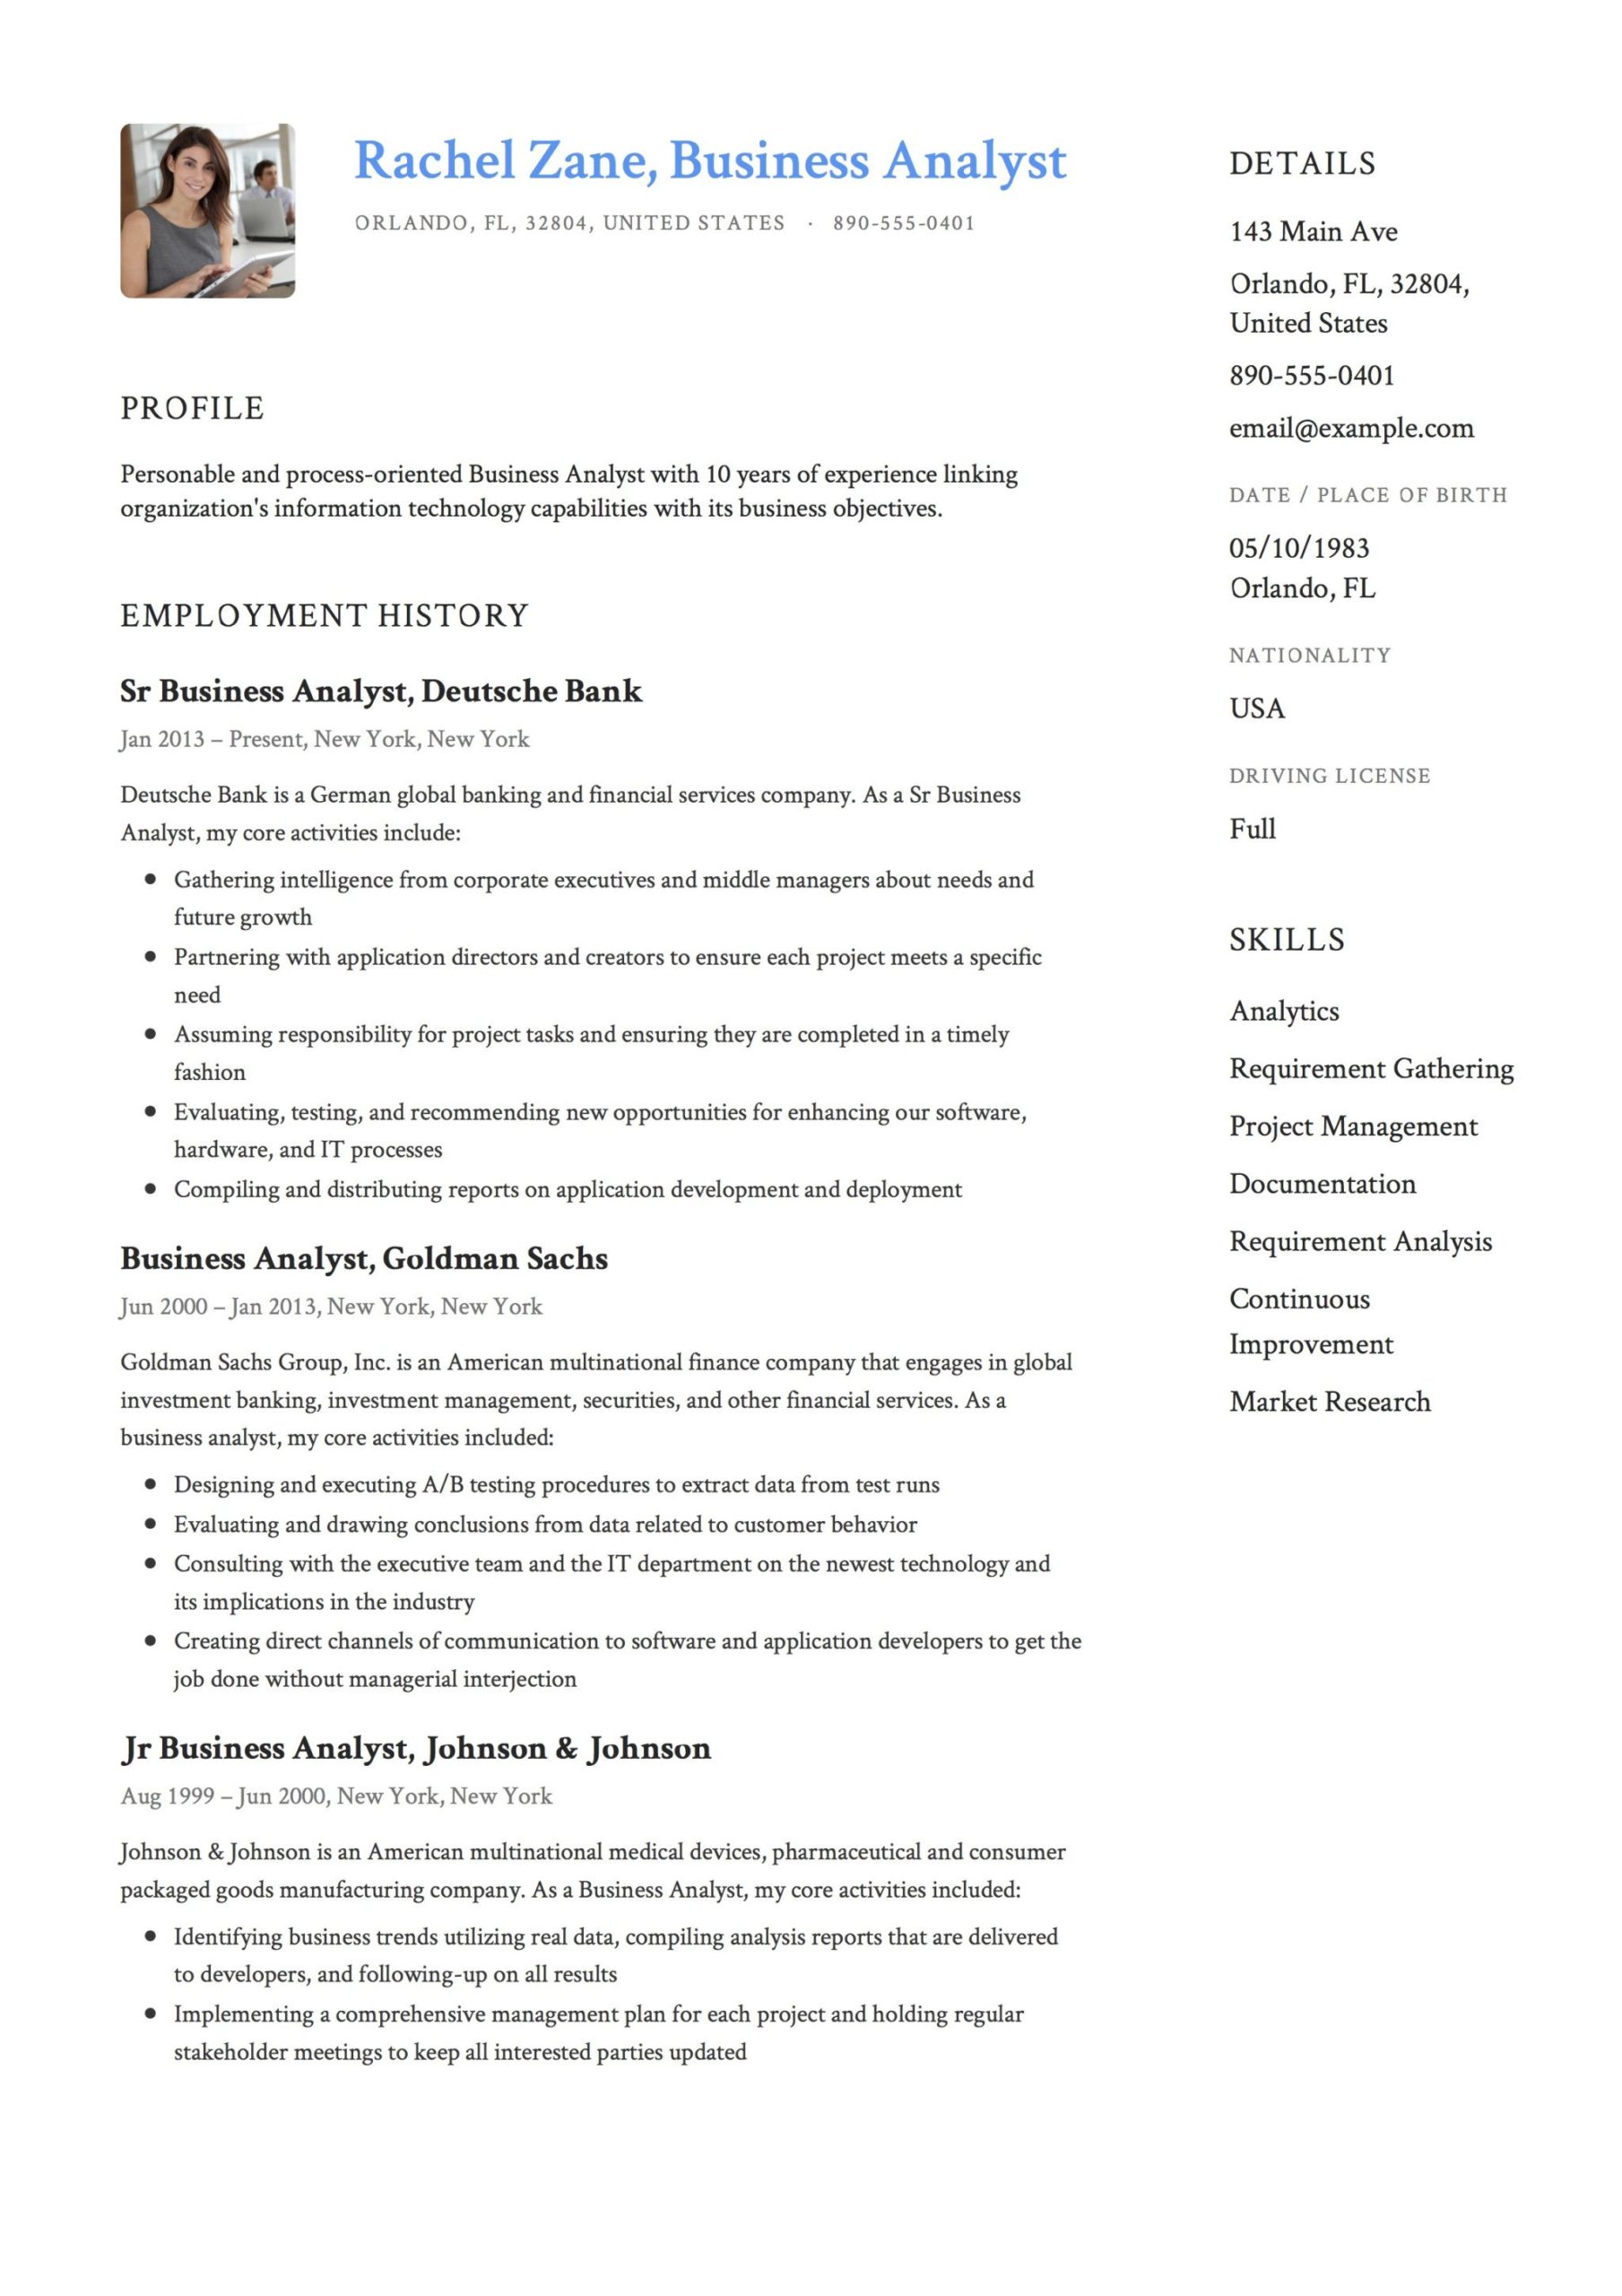 Samples Of Healthcare Business Analyst Resume Business Analyst Resume Examples & Writing Guide 2022